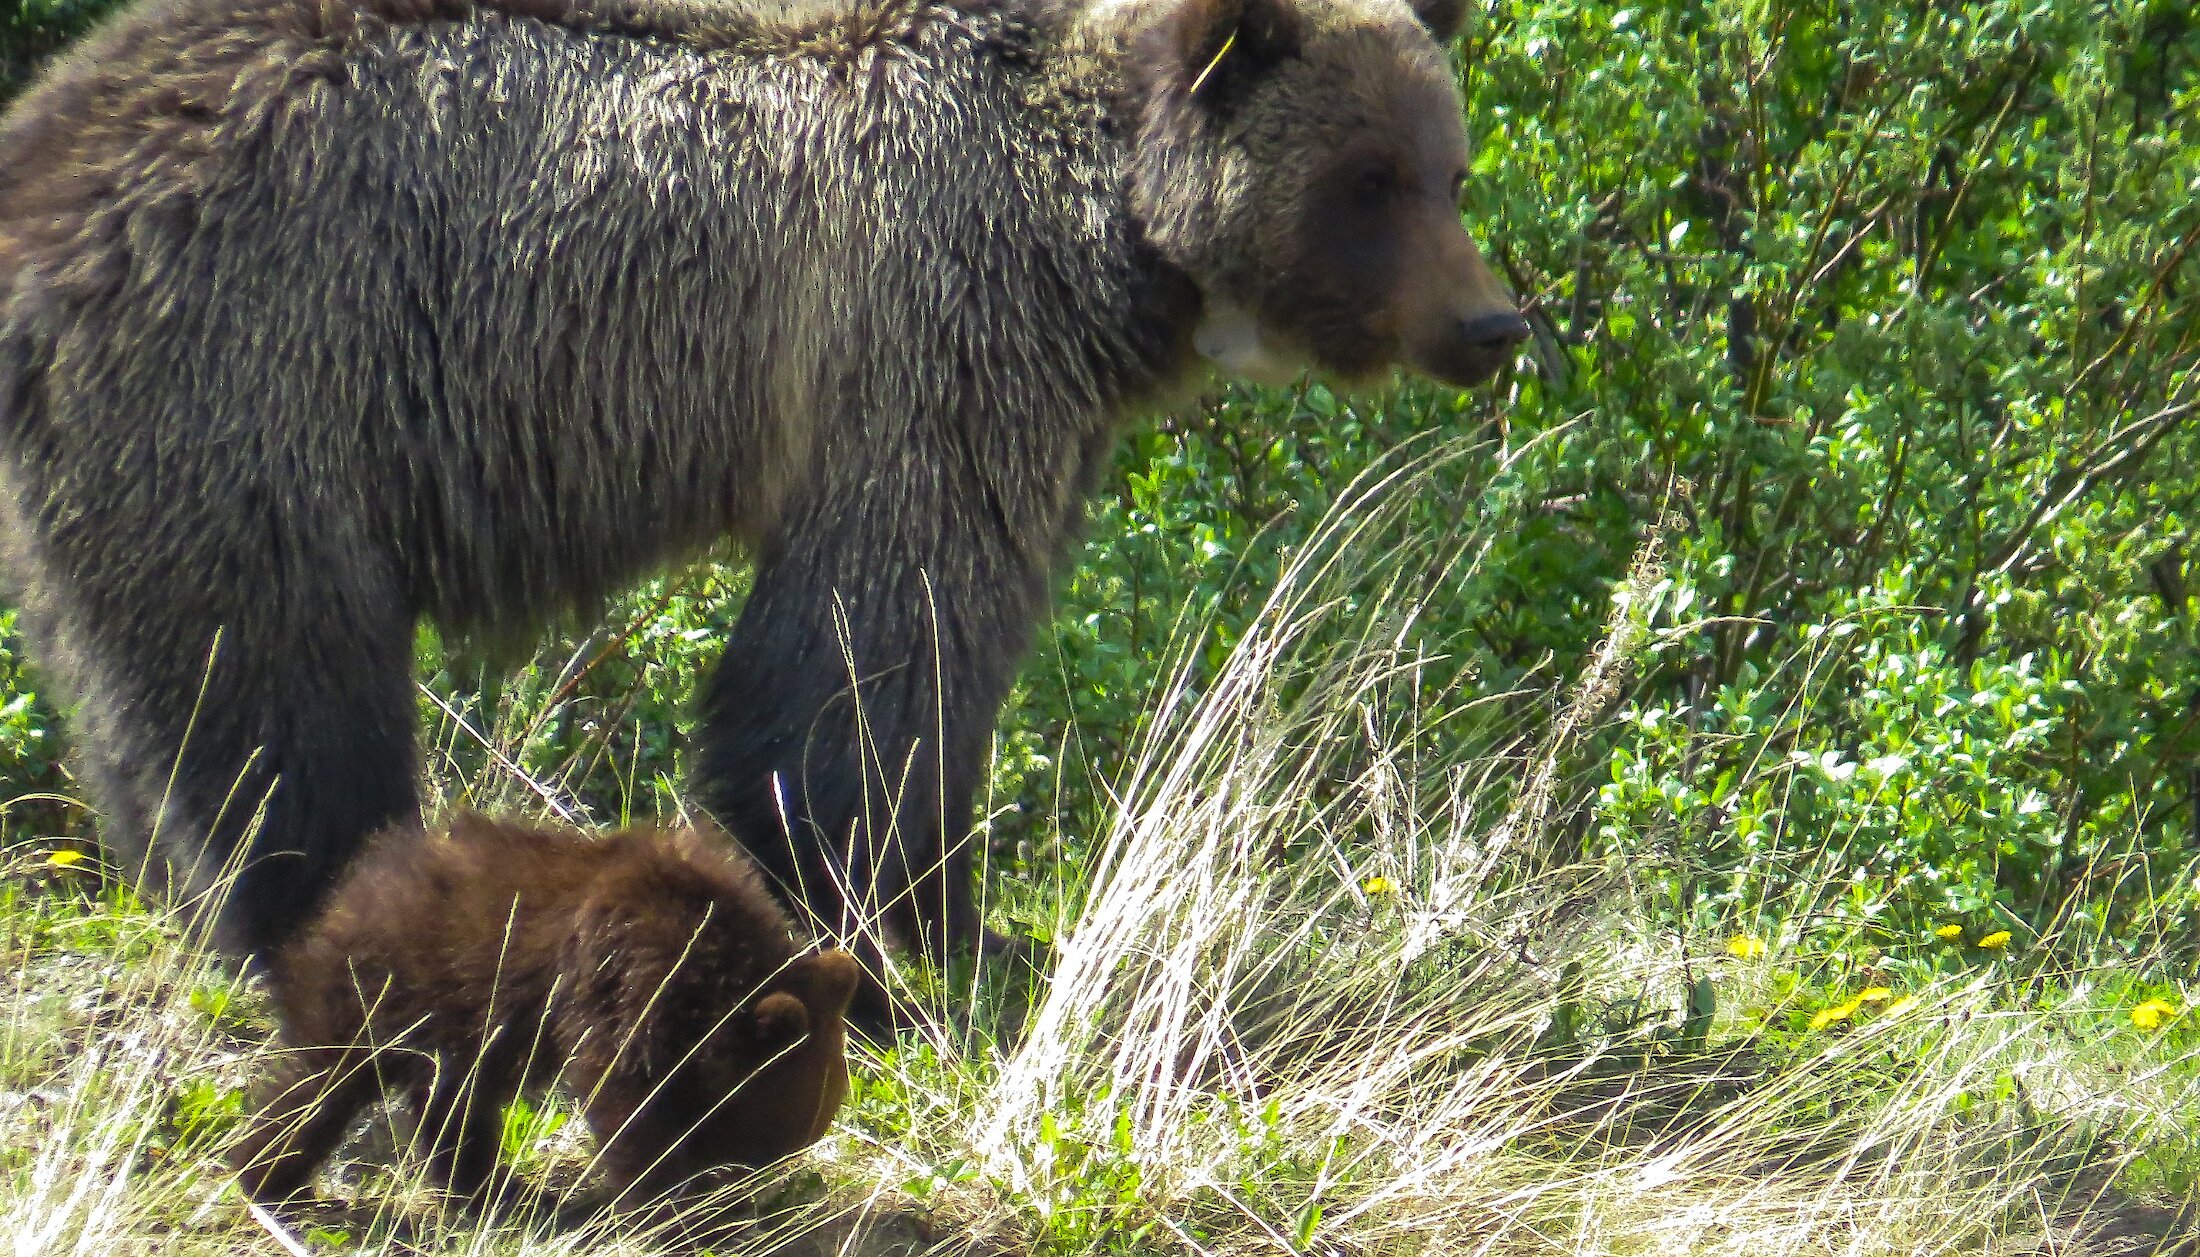 A grizzly bear and its cub in the grass at the Lake Louise Ski Resort summer Gondola